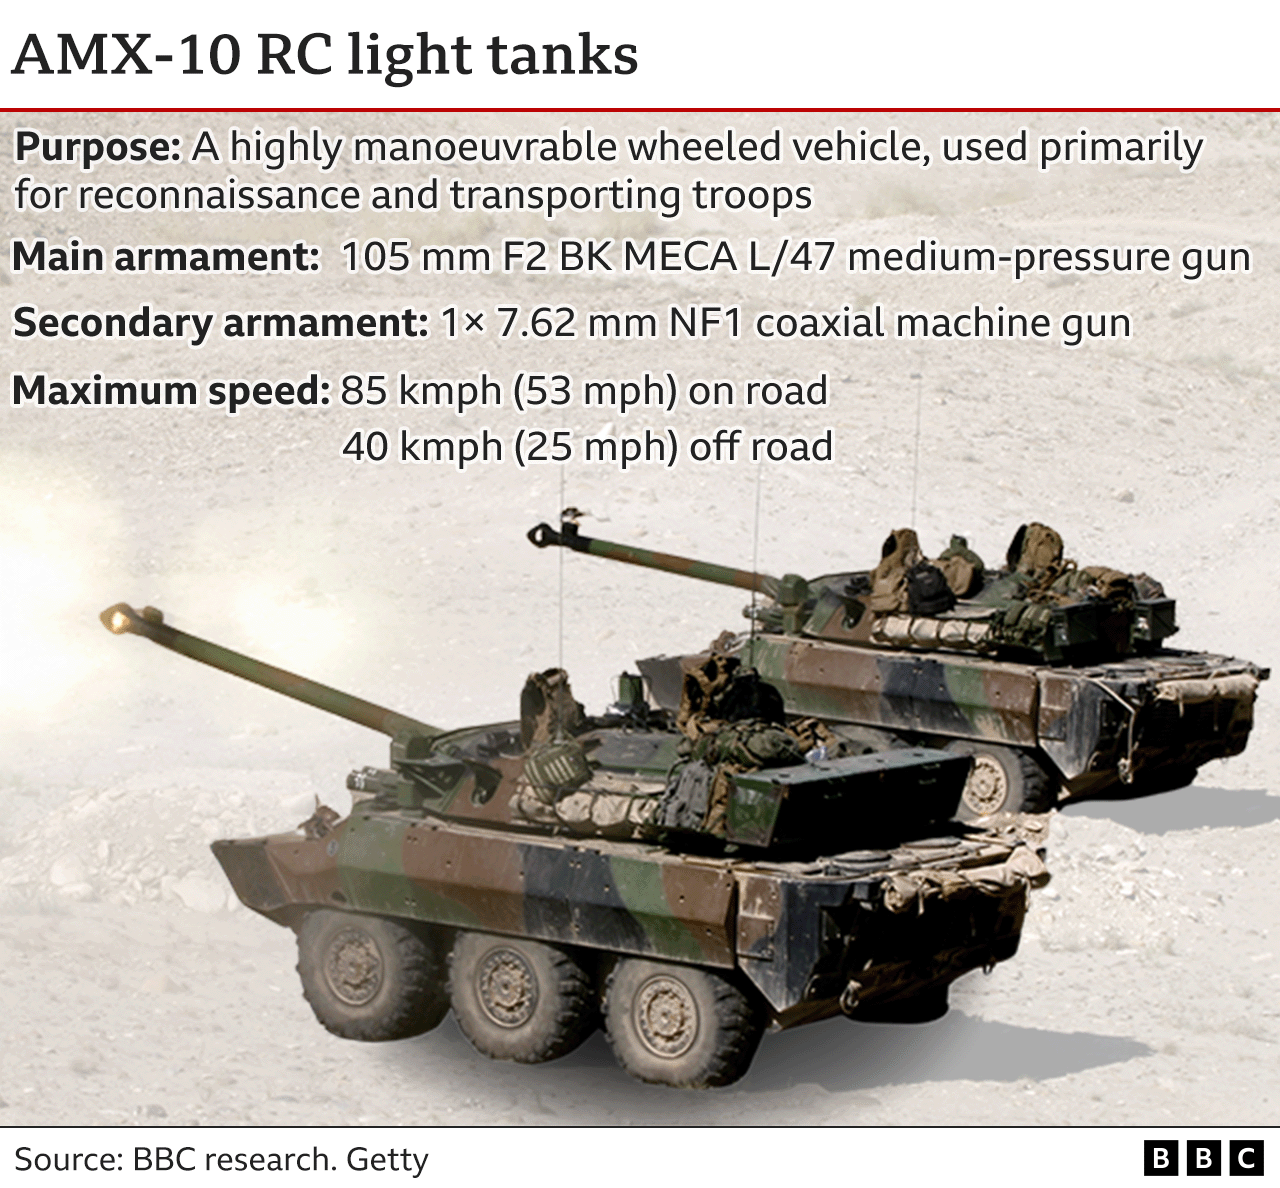 French "light tanks" graphic